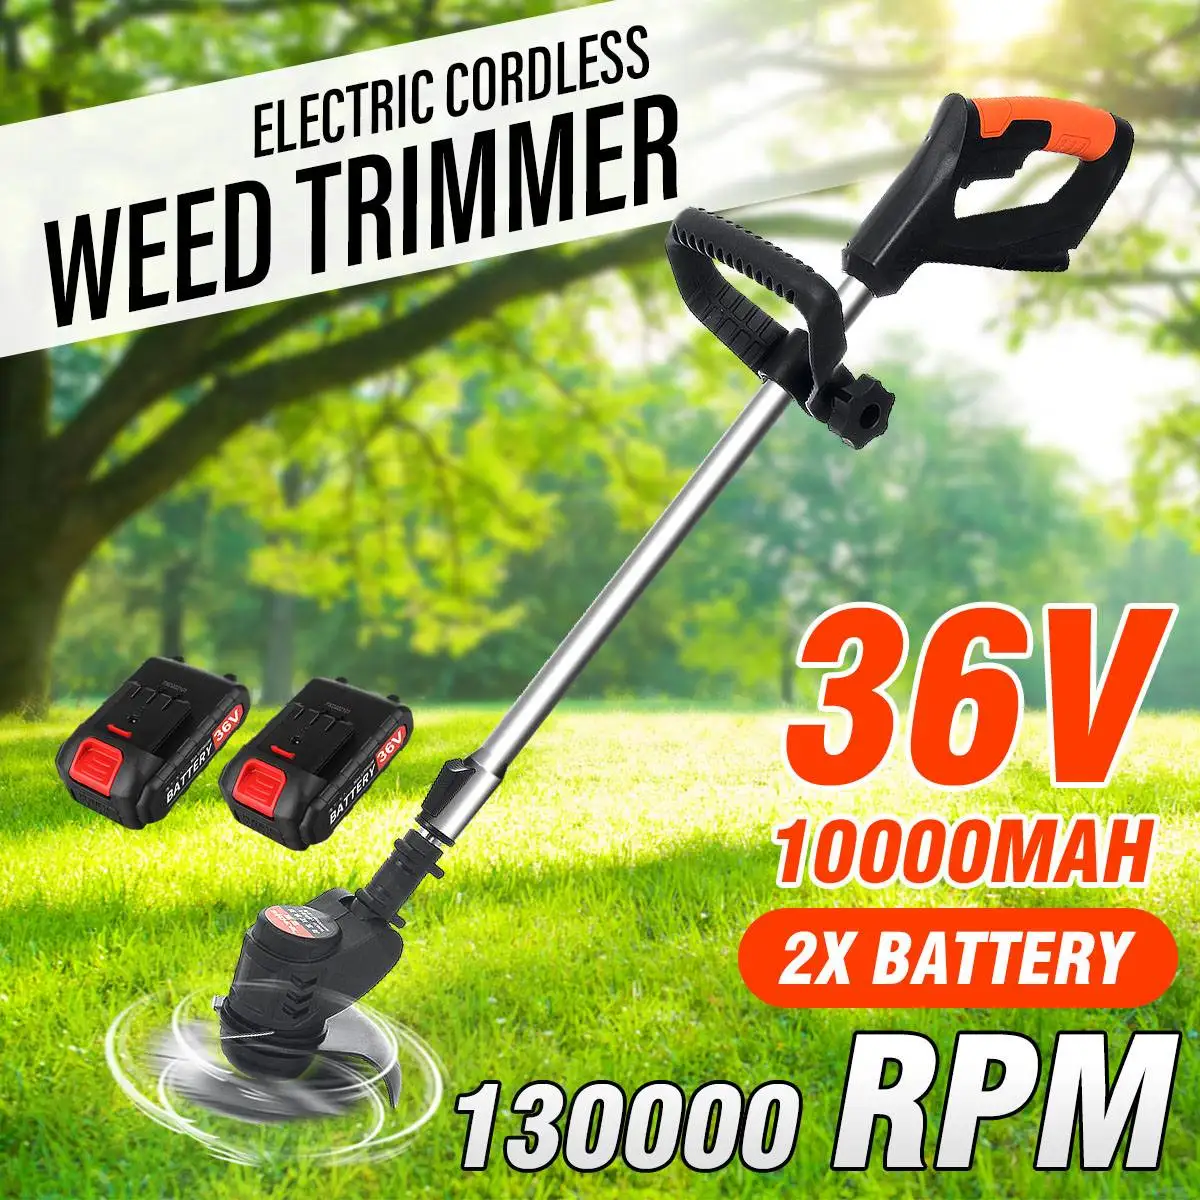 

Cordless Electric Grass Hedge Trimmer 880W 12V Portable Lawn Mower Handheld Mowing Machine Home Garden Power Tool Brush Cutter